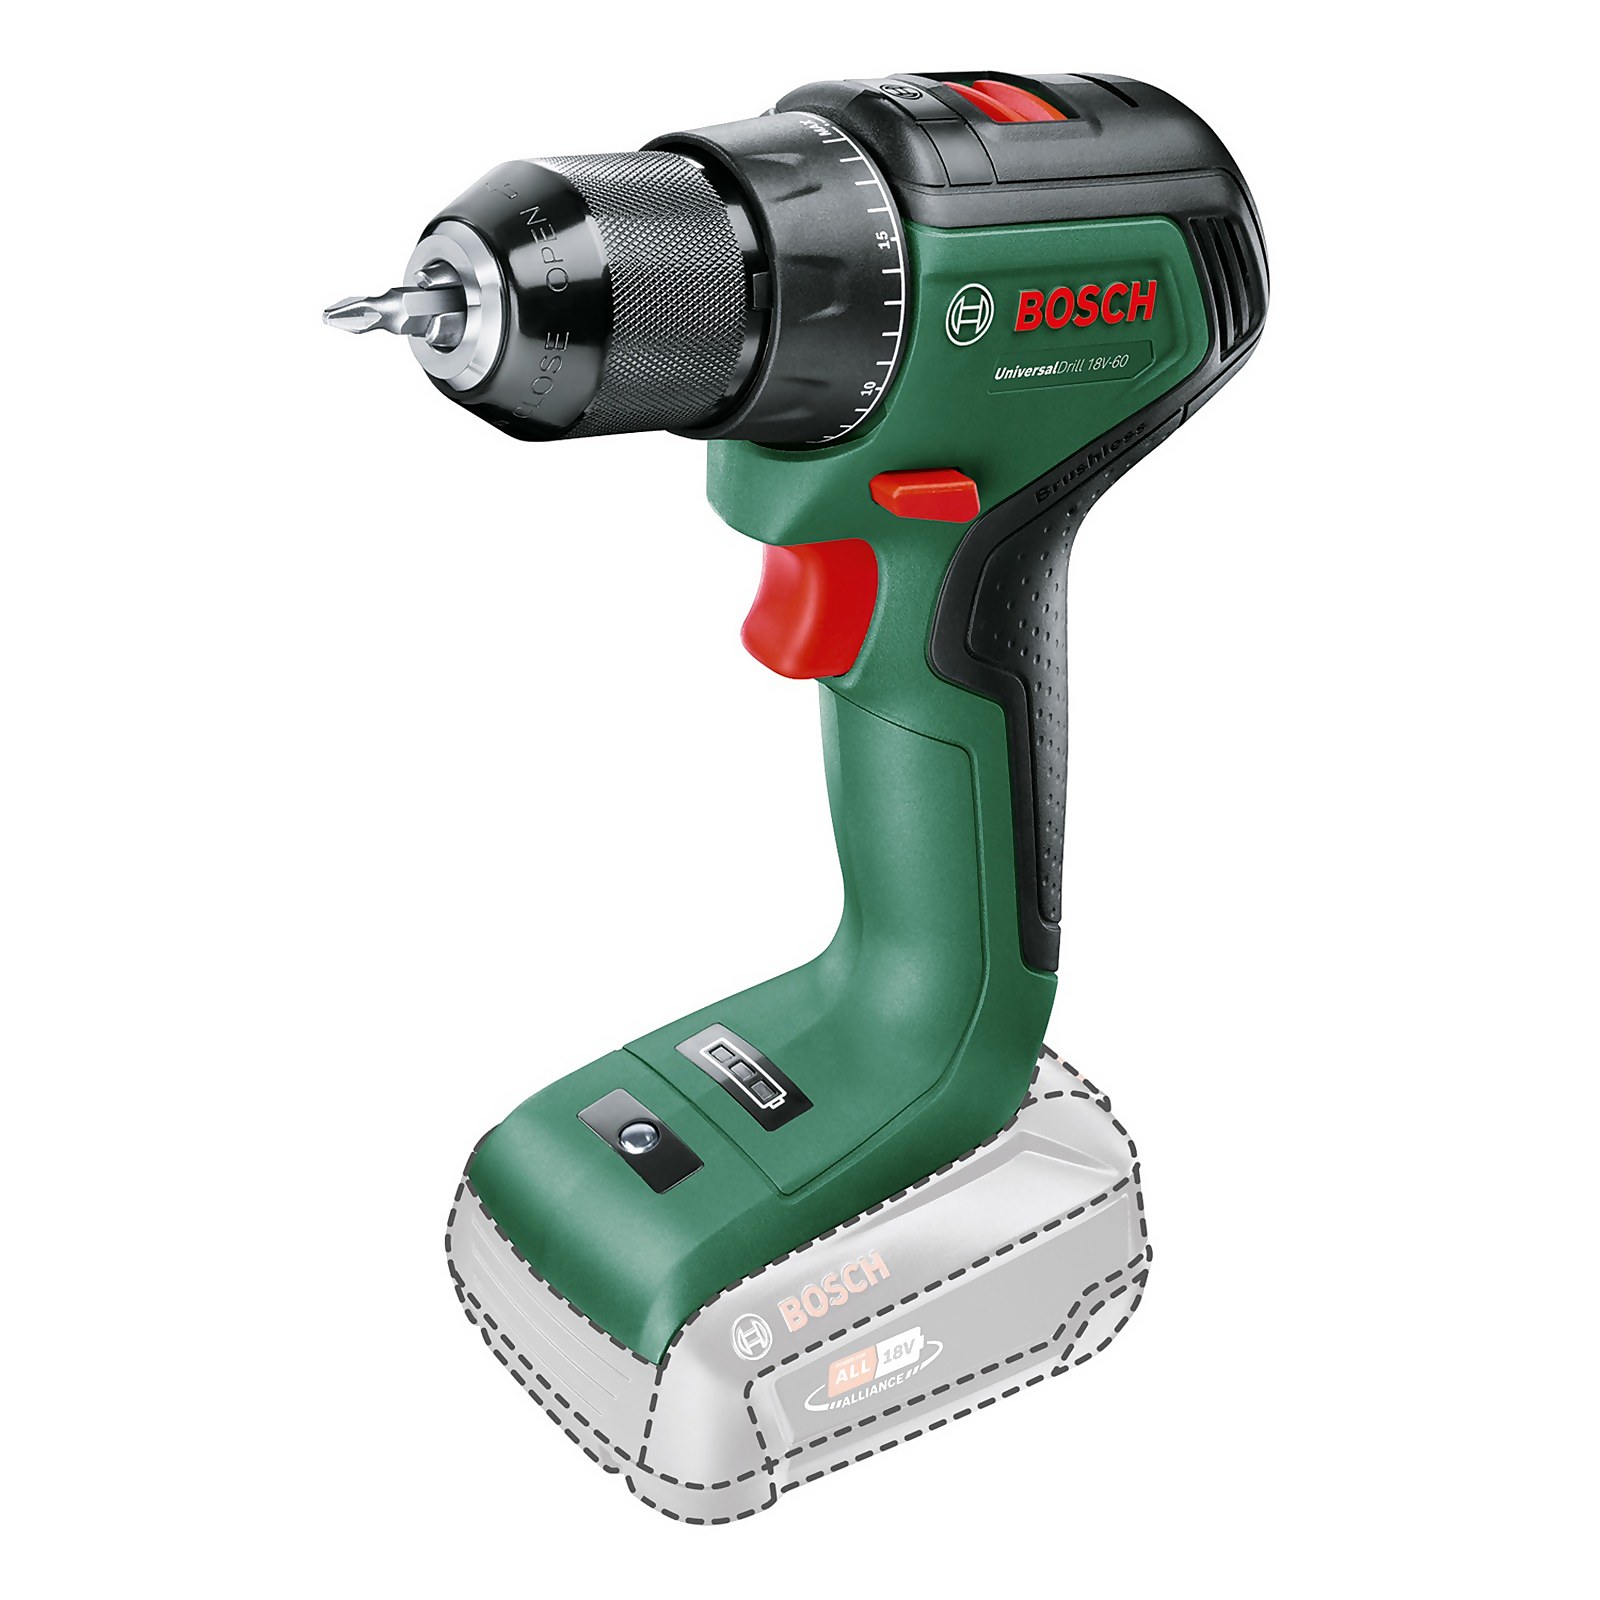 Photo of Bosch Universaldrill 18v-60 -no Battery Included-